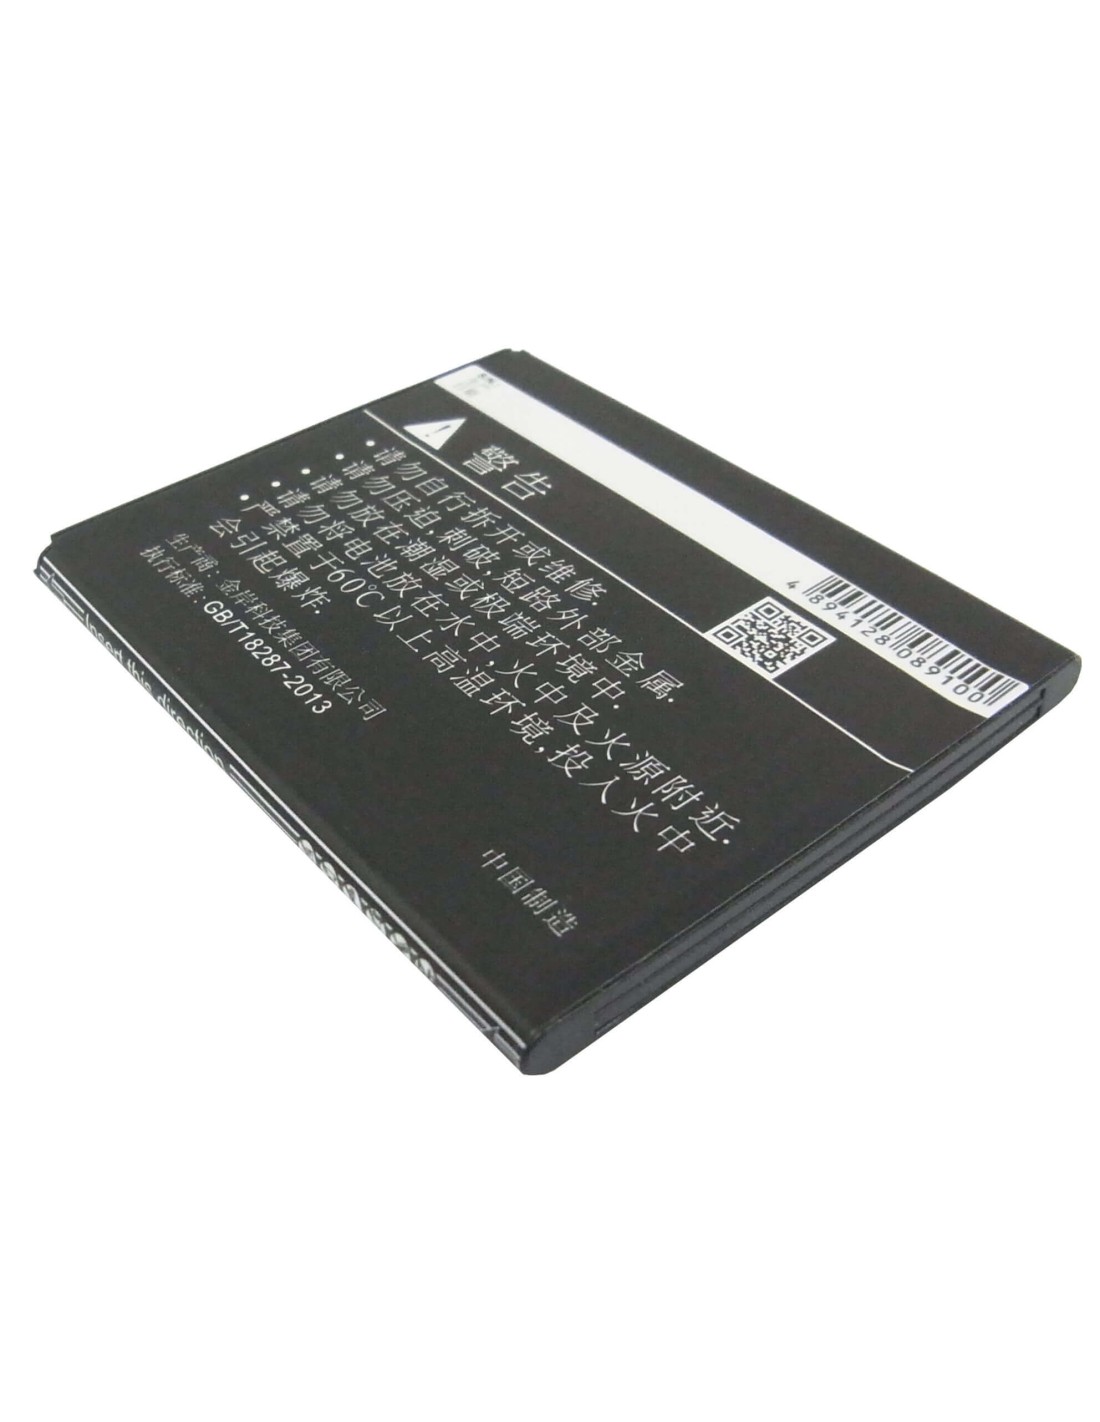 Battery for K-Touch U81T 3.7V, 1400mAh - 5.18Wh